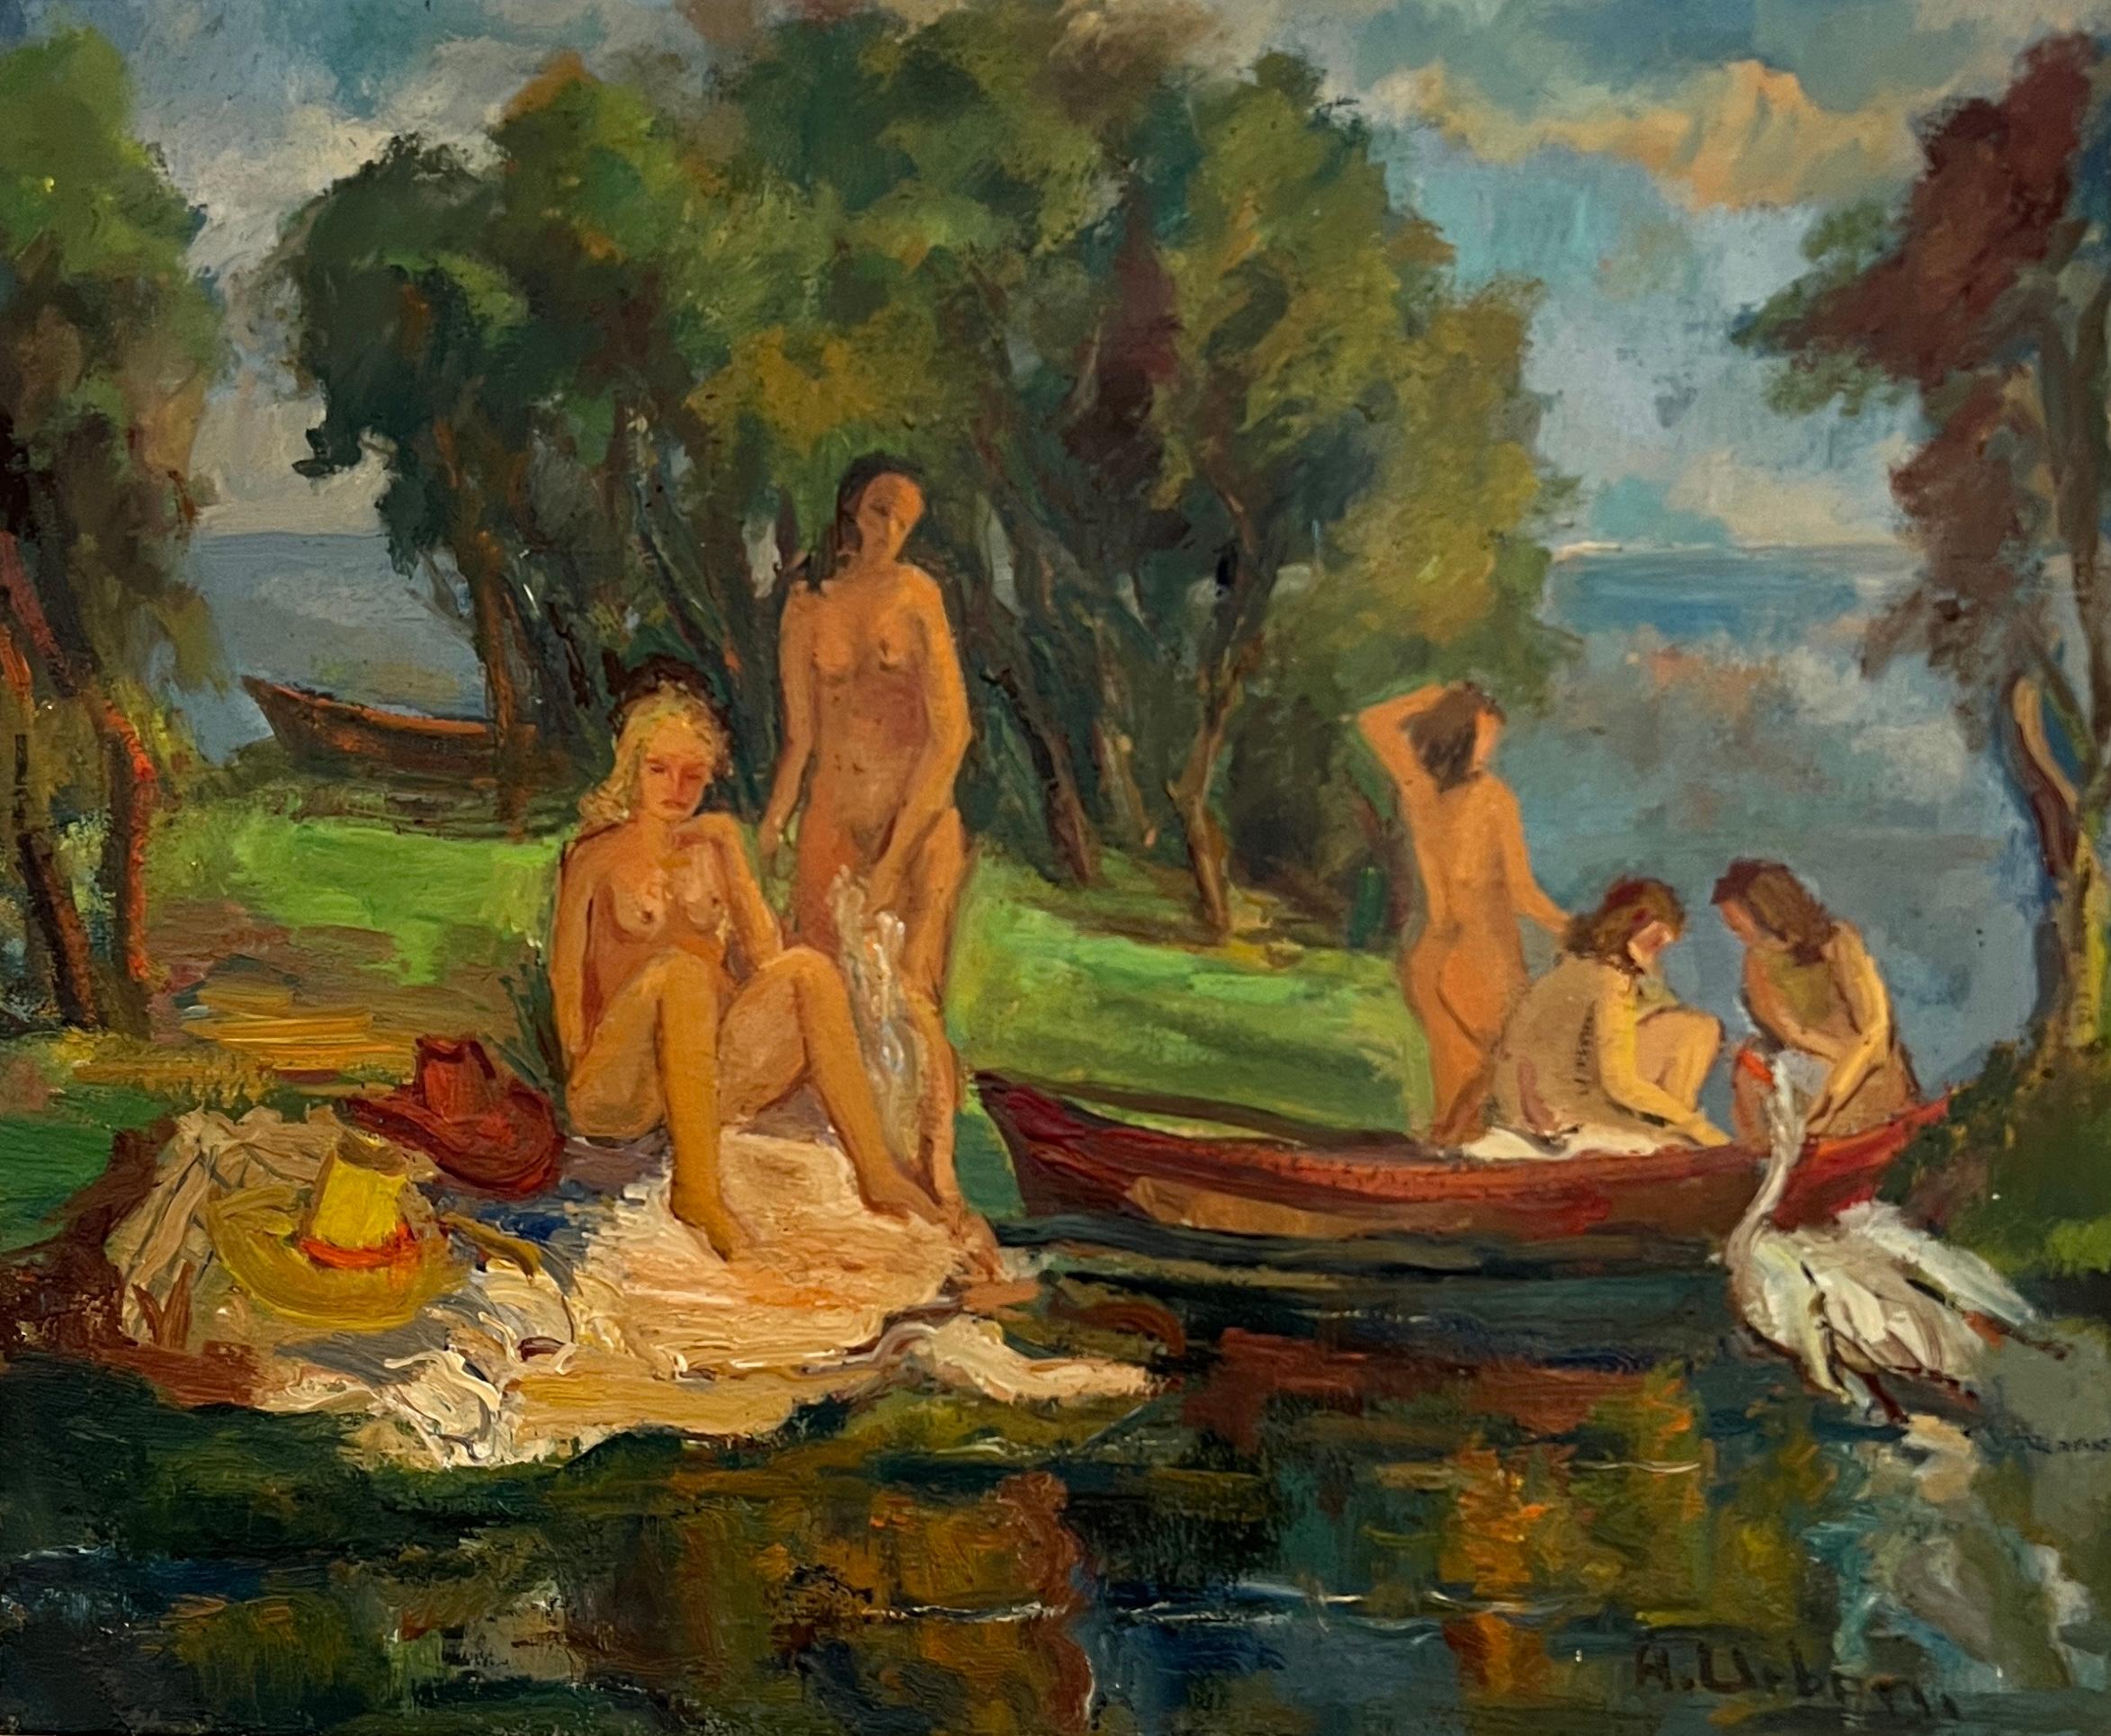 The bathers and the swan